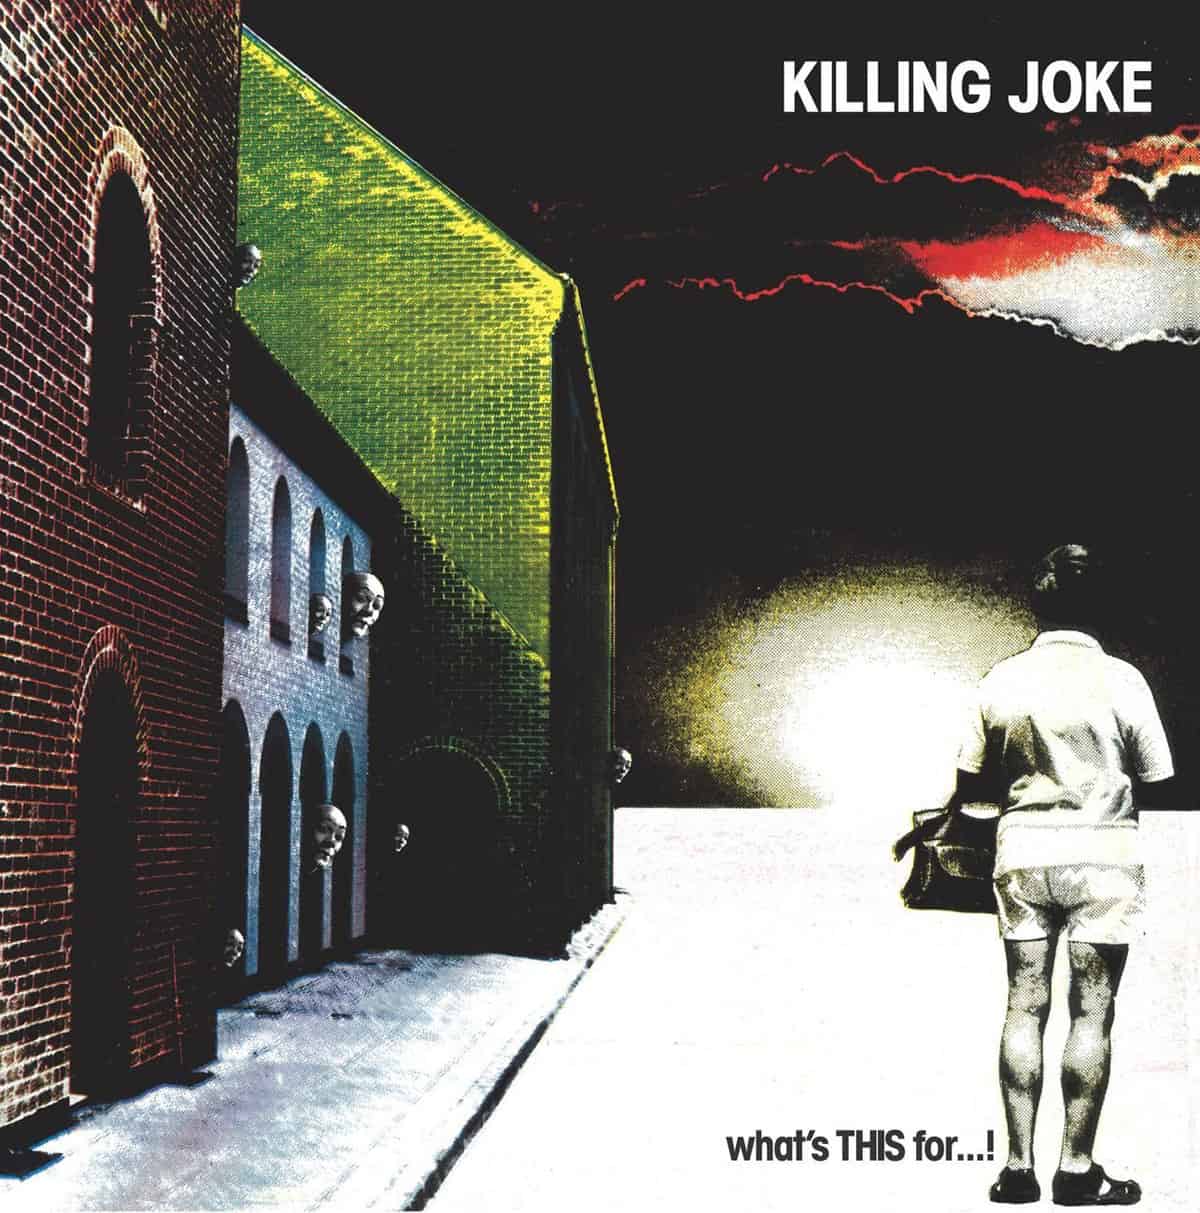 What’s THIS for…! Killing Joke in Norwich